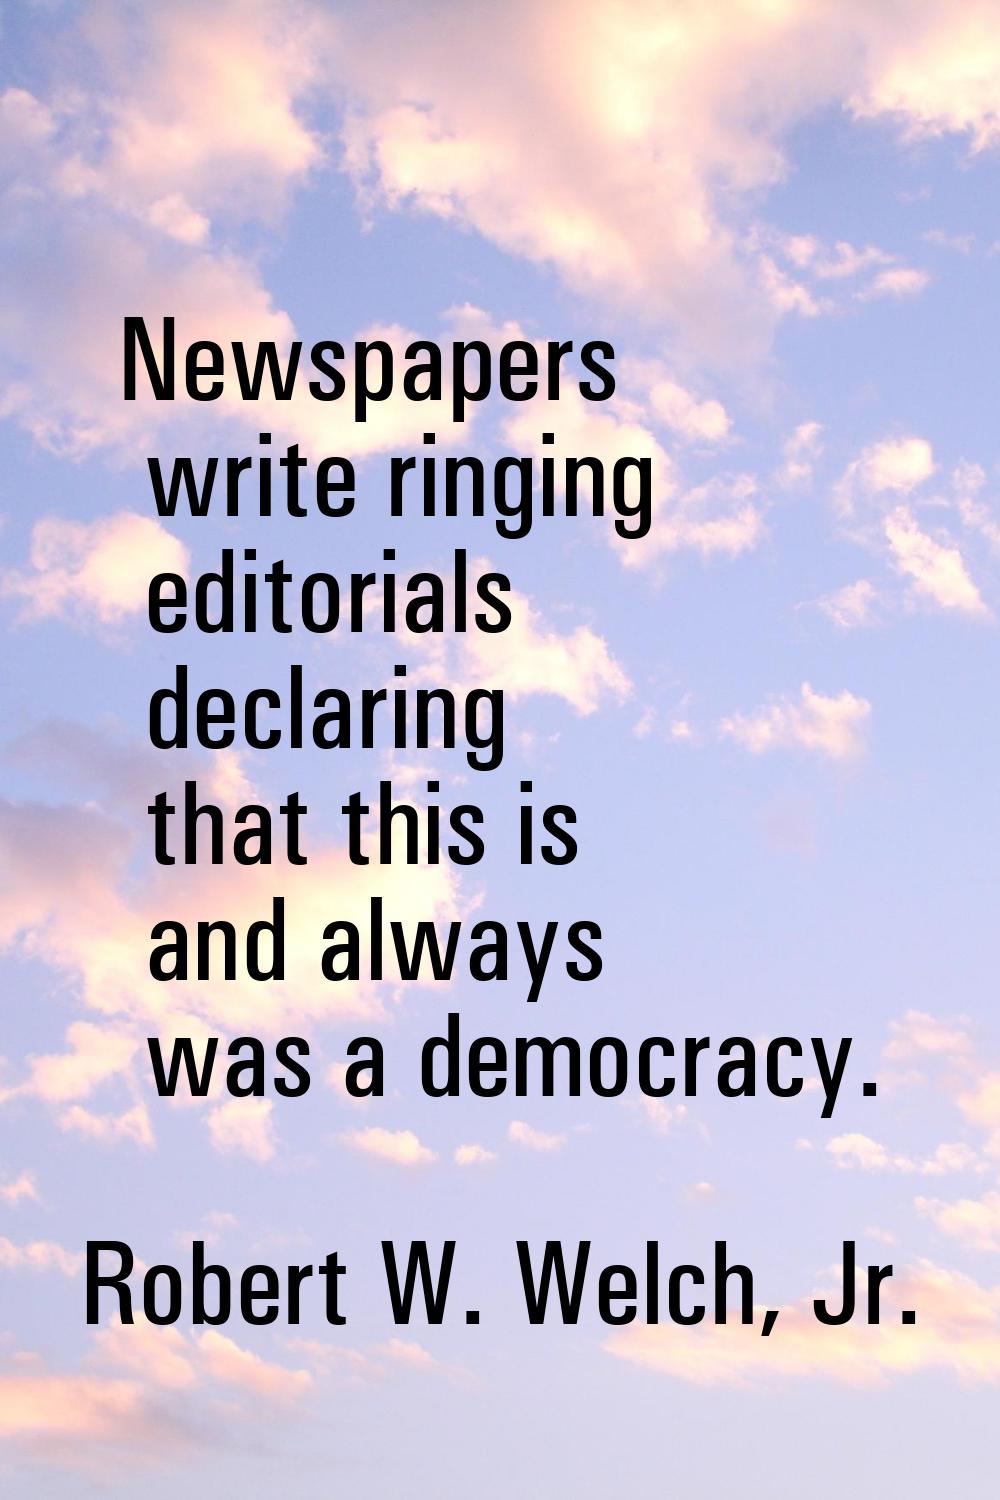 Newspapers write ringing editorials declaring that this is and always was a democracy.